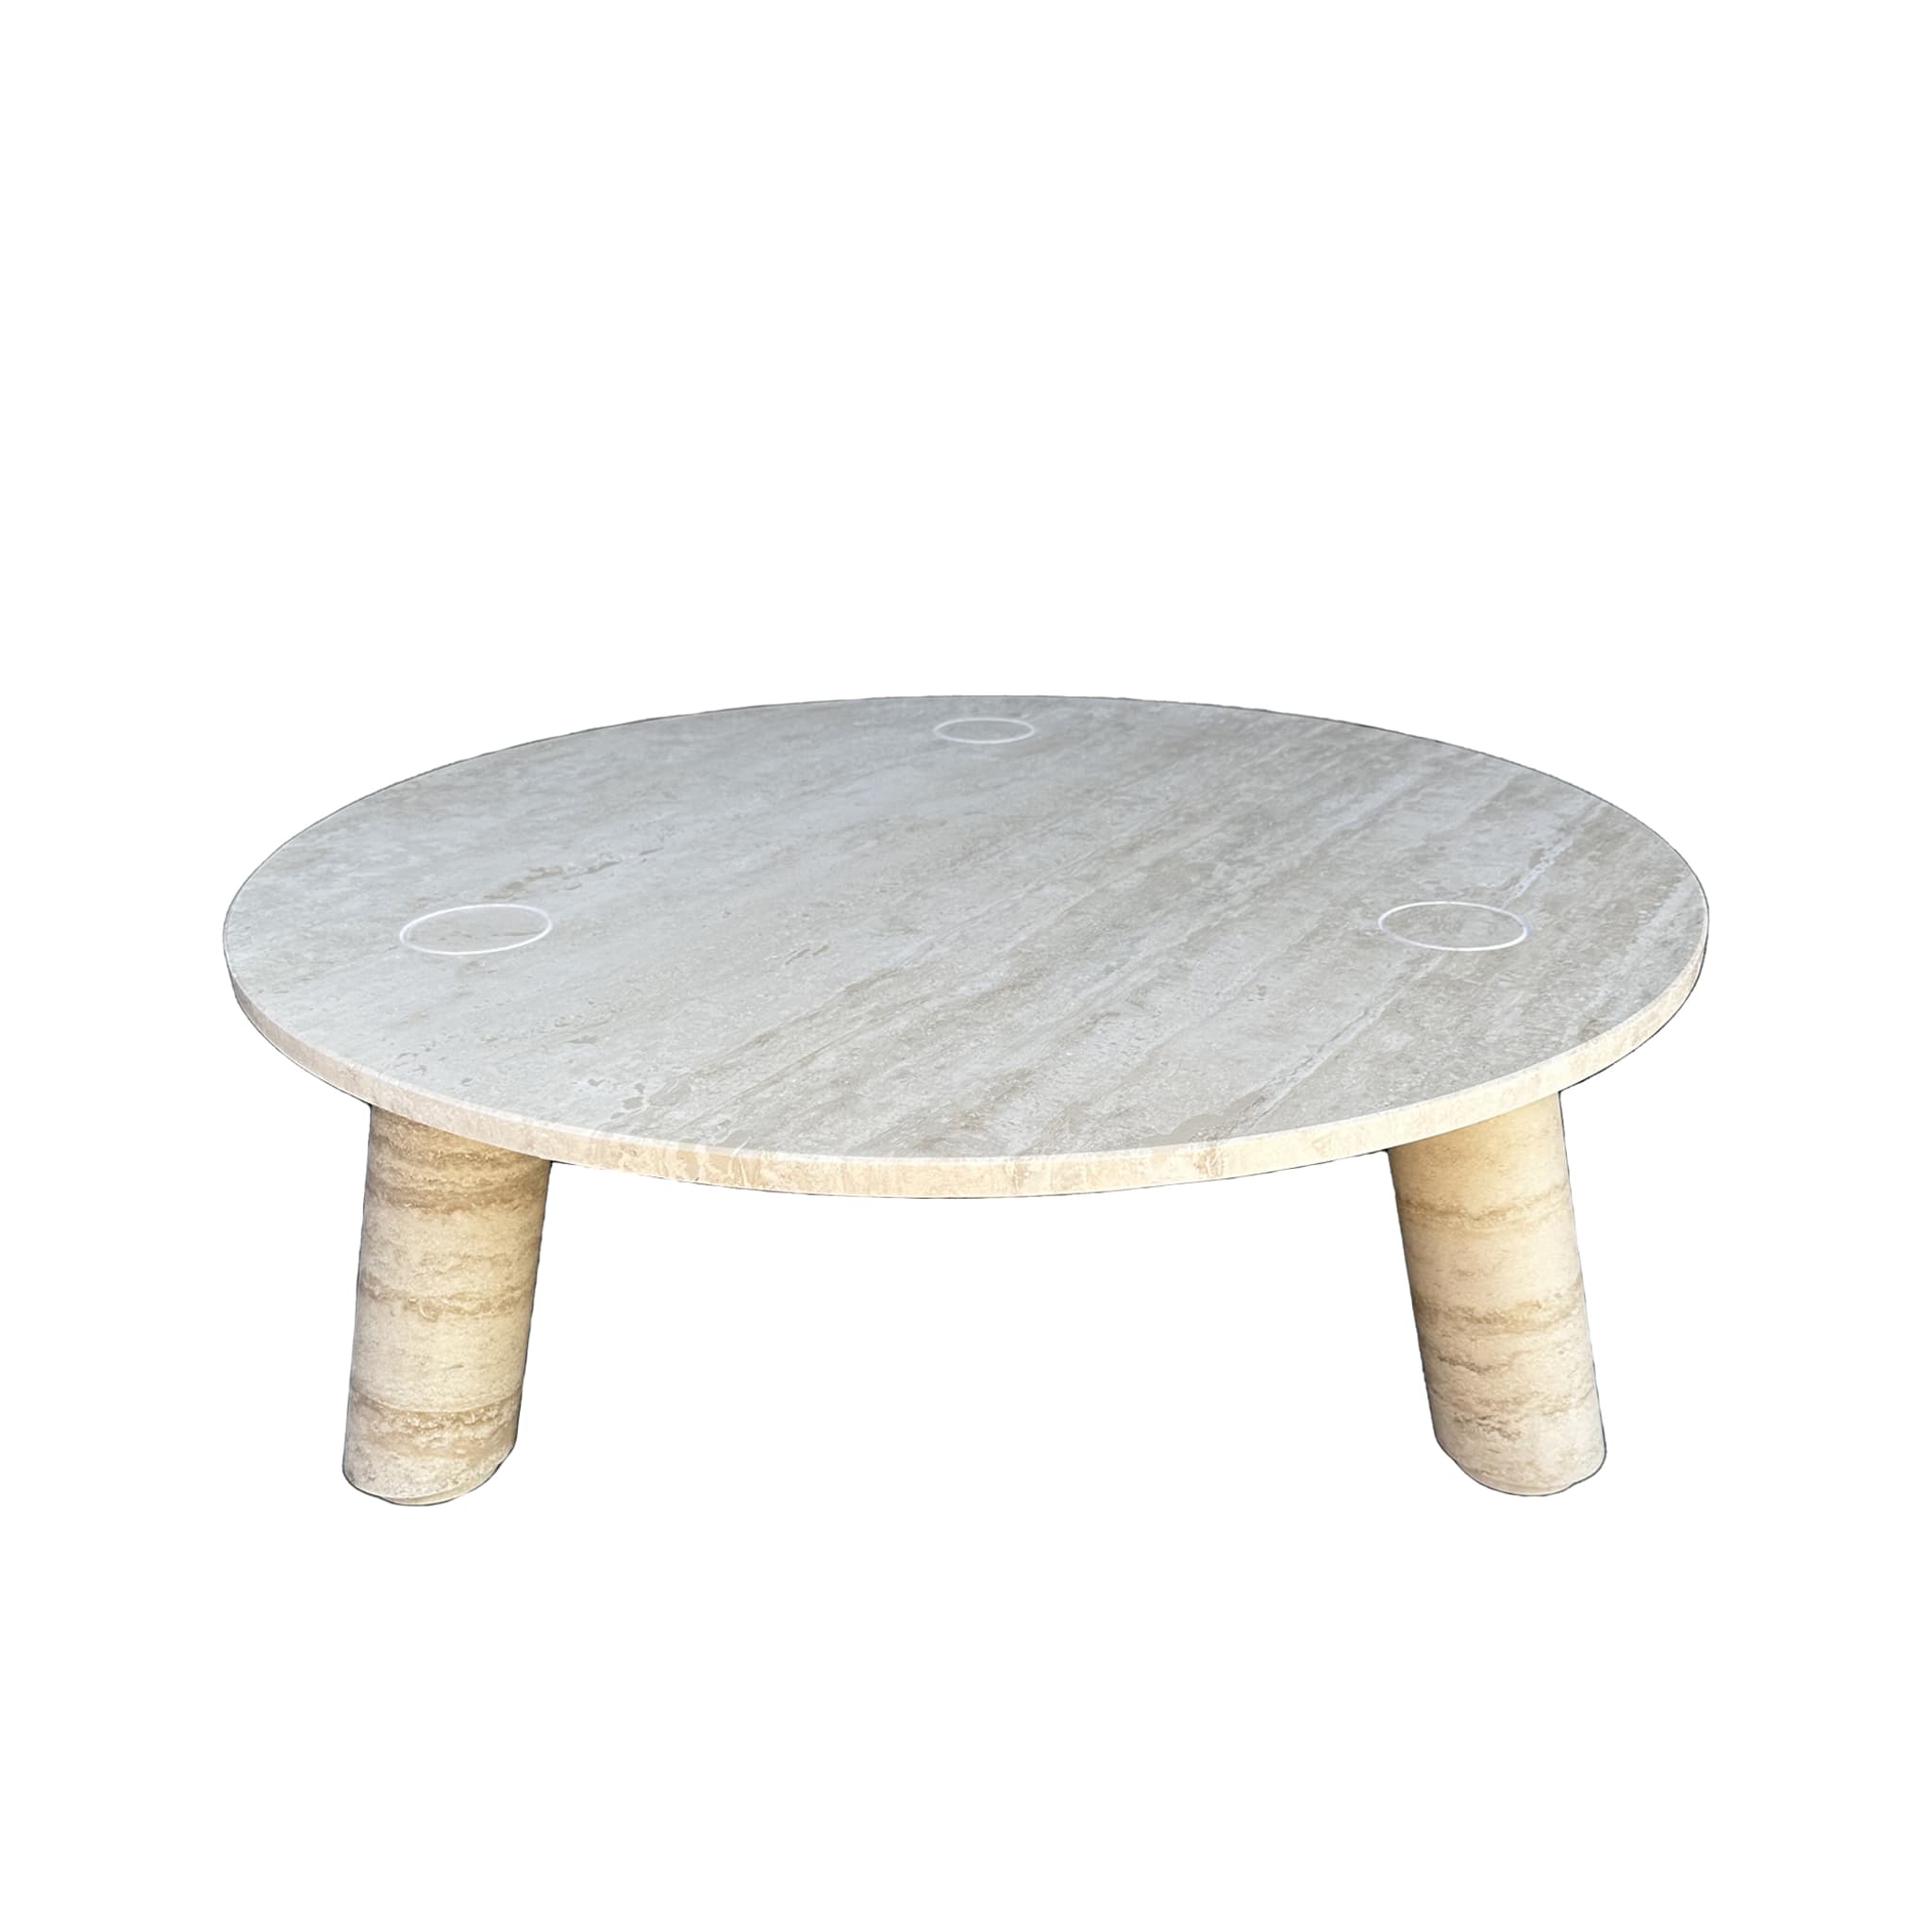 Low Table in Travertine Romano Marble - Main view